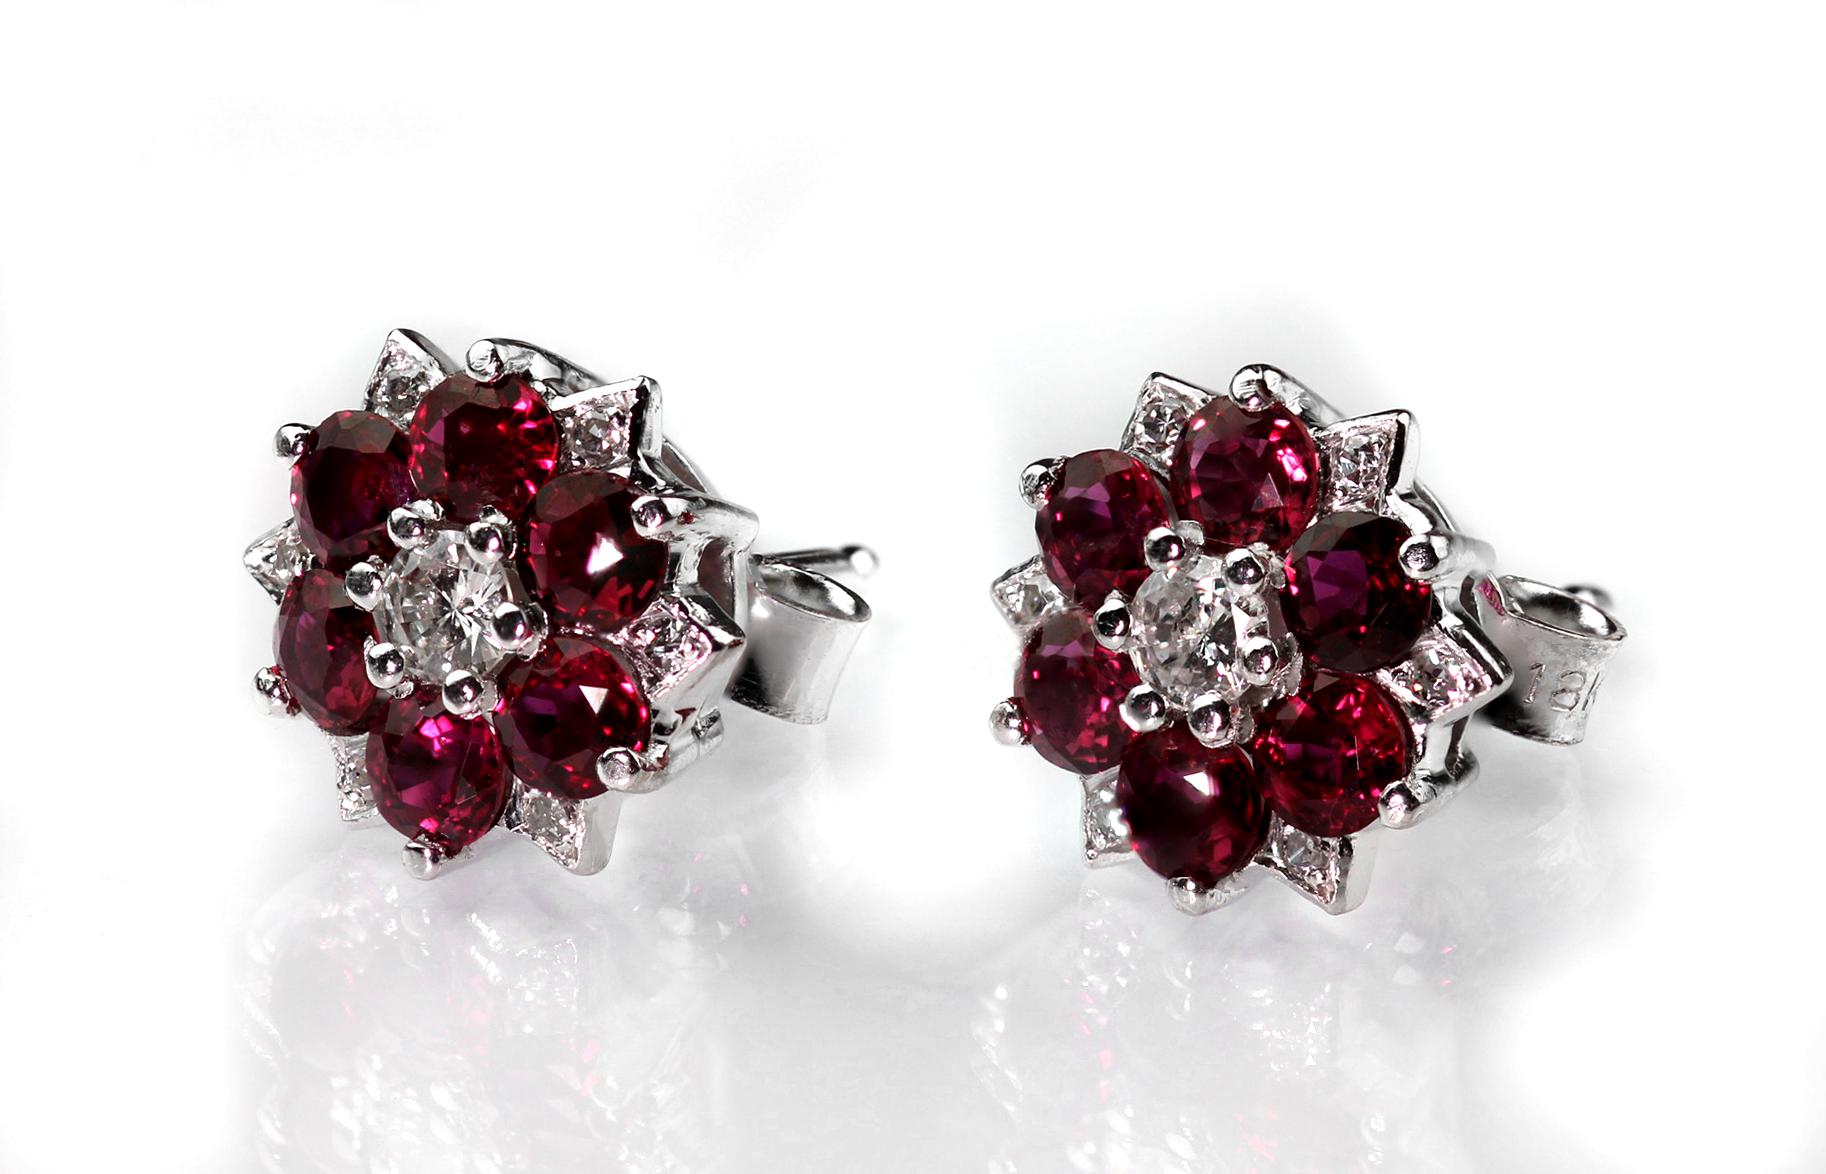 Exquisite gemstones hue of blazing ruby perfectly complement shining diamonds, pin and push on butterfly fittings. Set in 18 carat white gold hallmarked London 1975, sponsor mark not clear.
14 x round cut diamond, approximate total weight 0.20